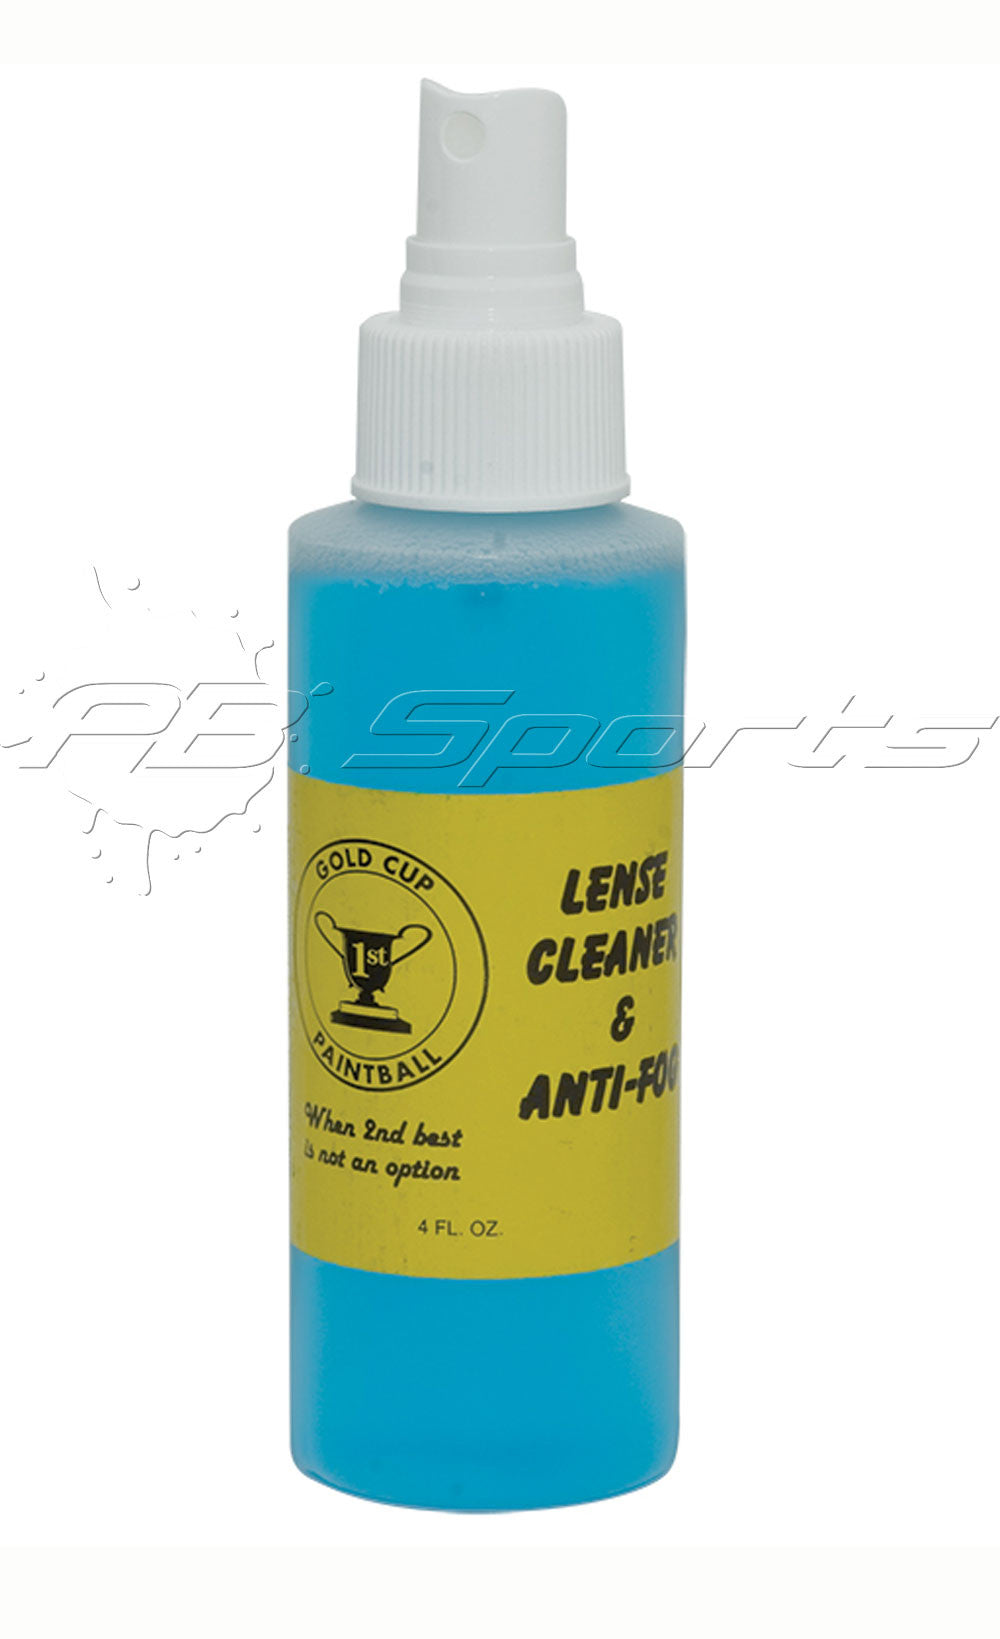 Gold Cup Lens Cleaner and Anti-Fog - 4oz - G.I. Sportz